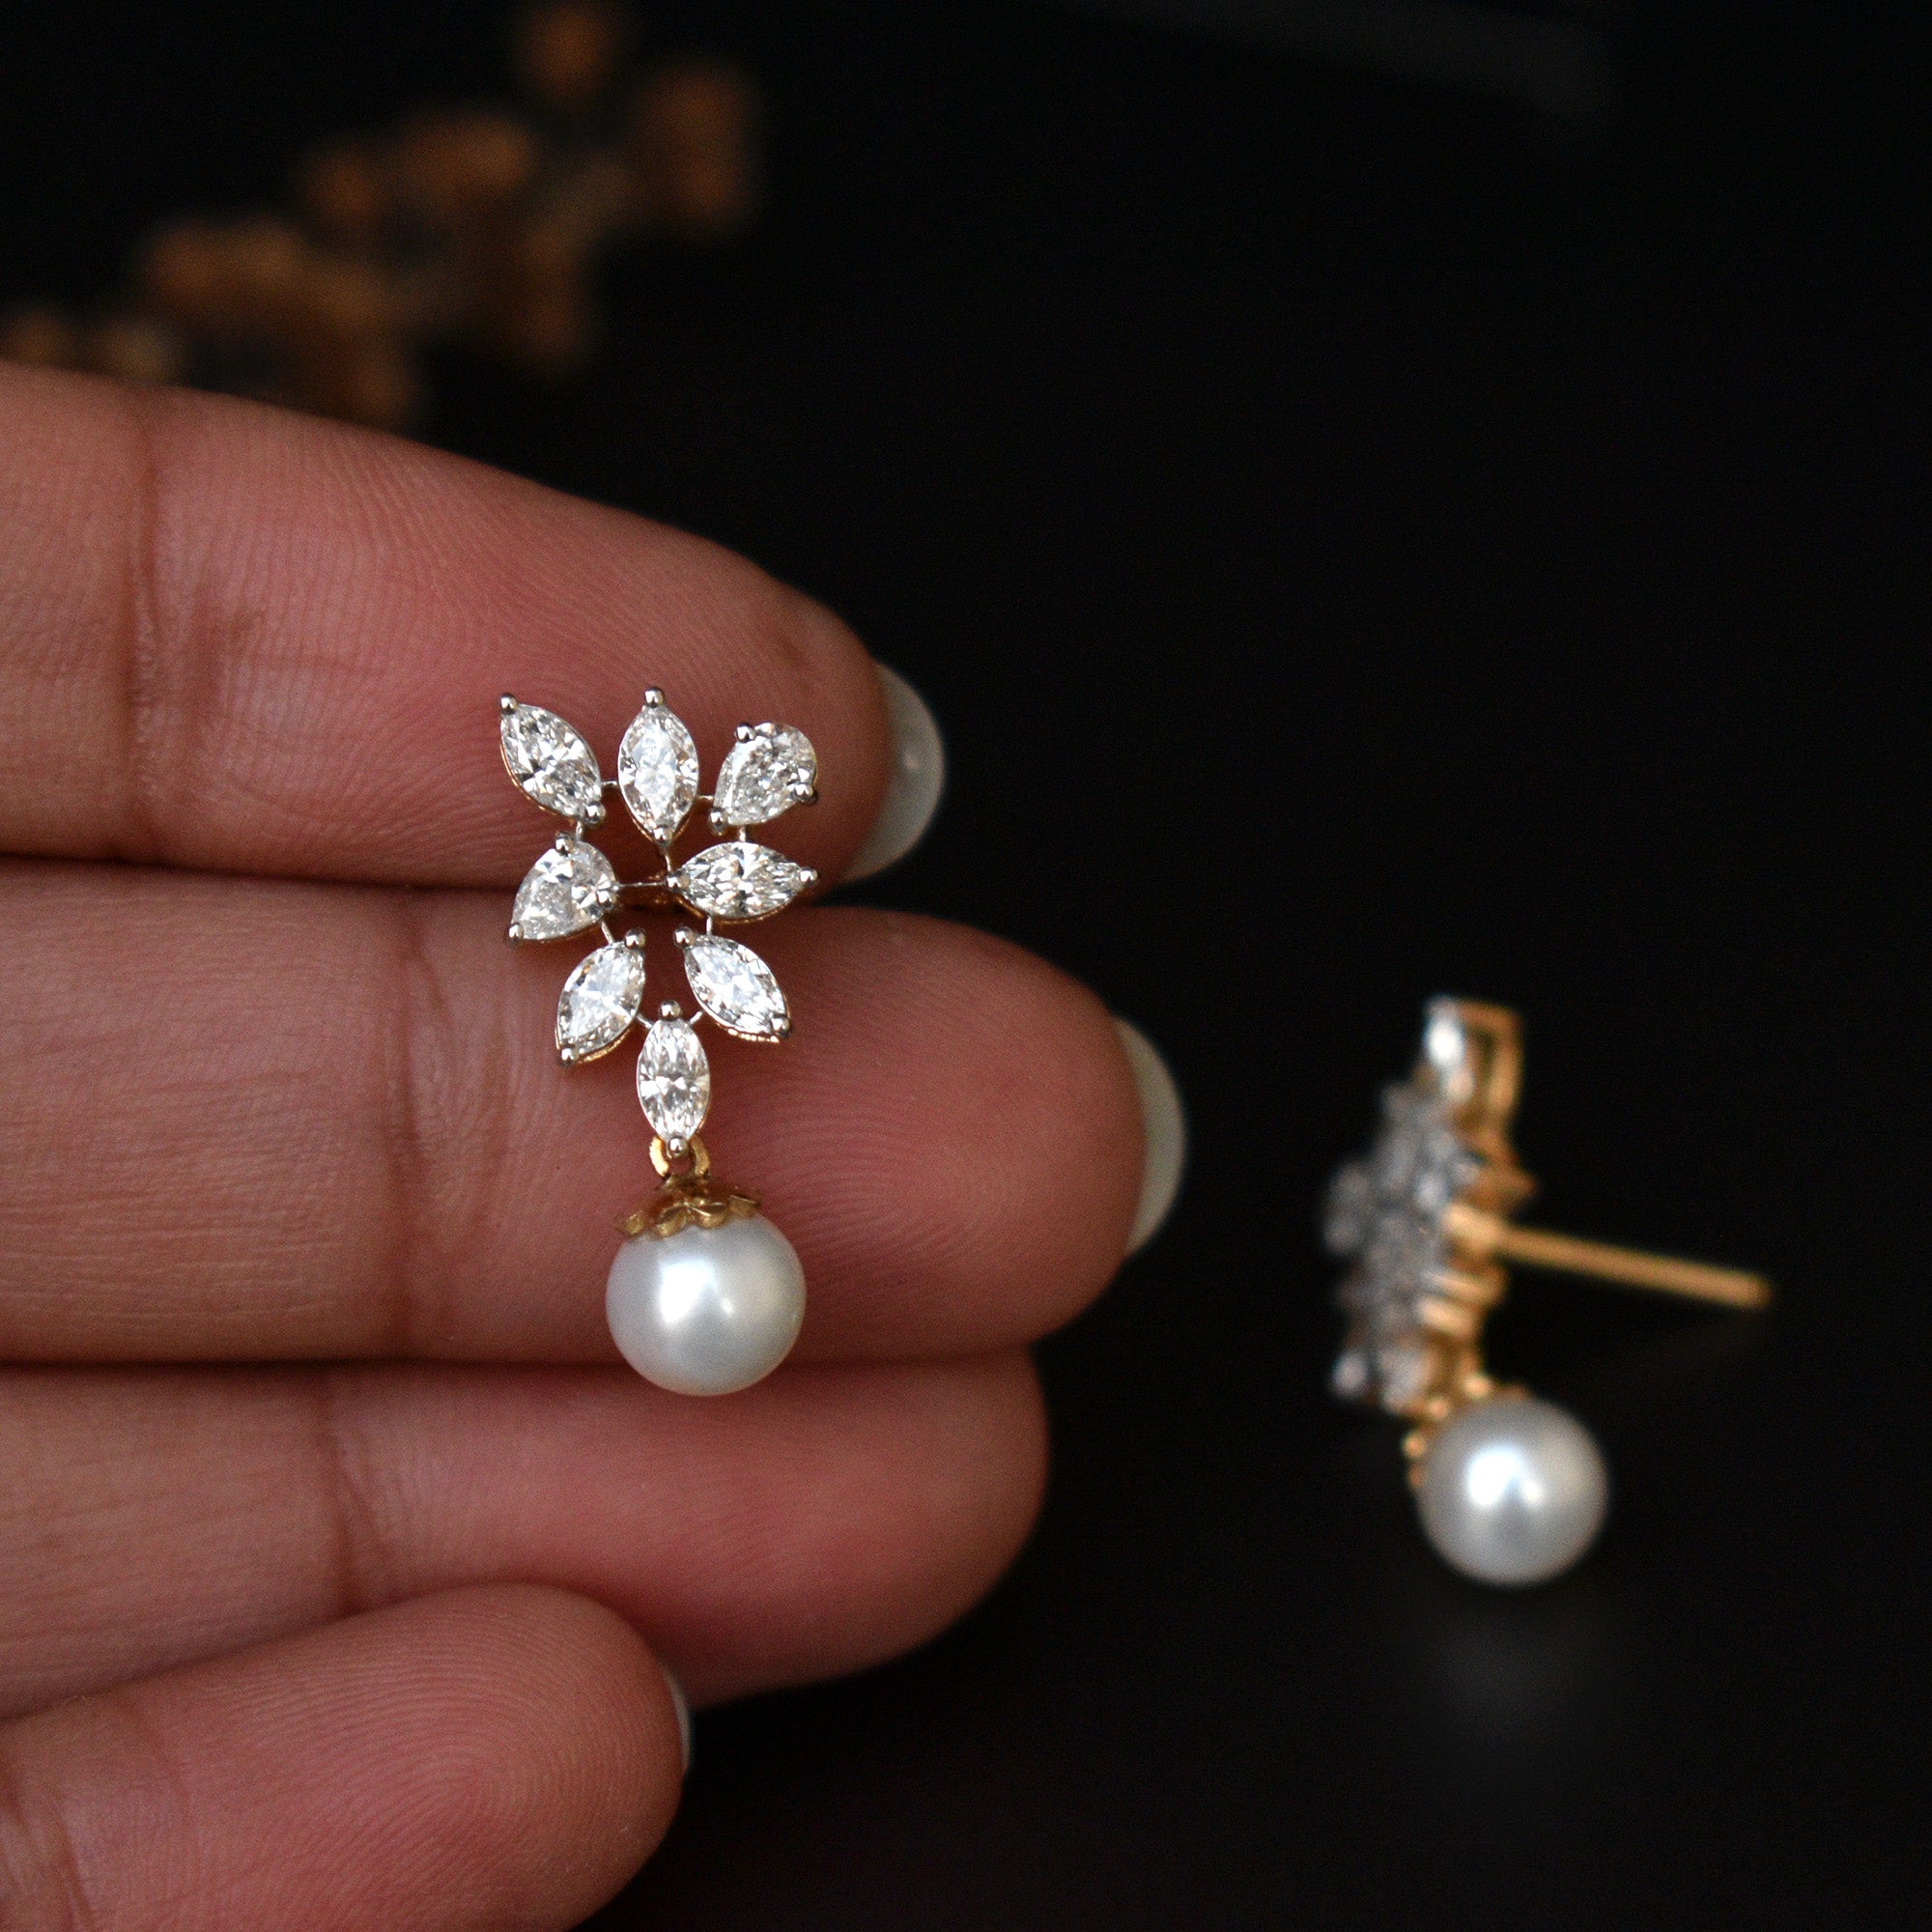 Simple Back Shaped Diamond Pearl Earrings Personality Cold Wind Metal Stud  Earring Price in India  Buy Simple Back Shaped Diamond Pearl Earrings  Personality Cold Wind Metal Stud Earring online at Shopsyin